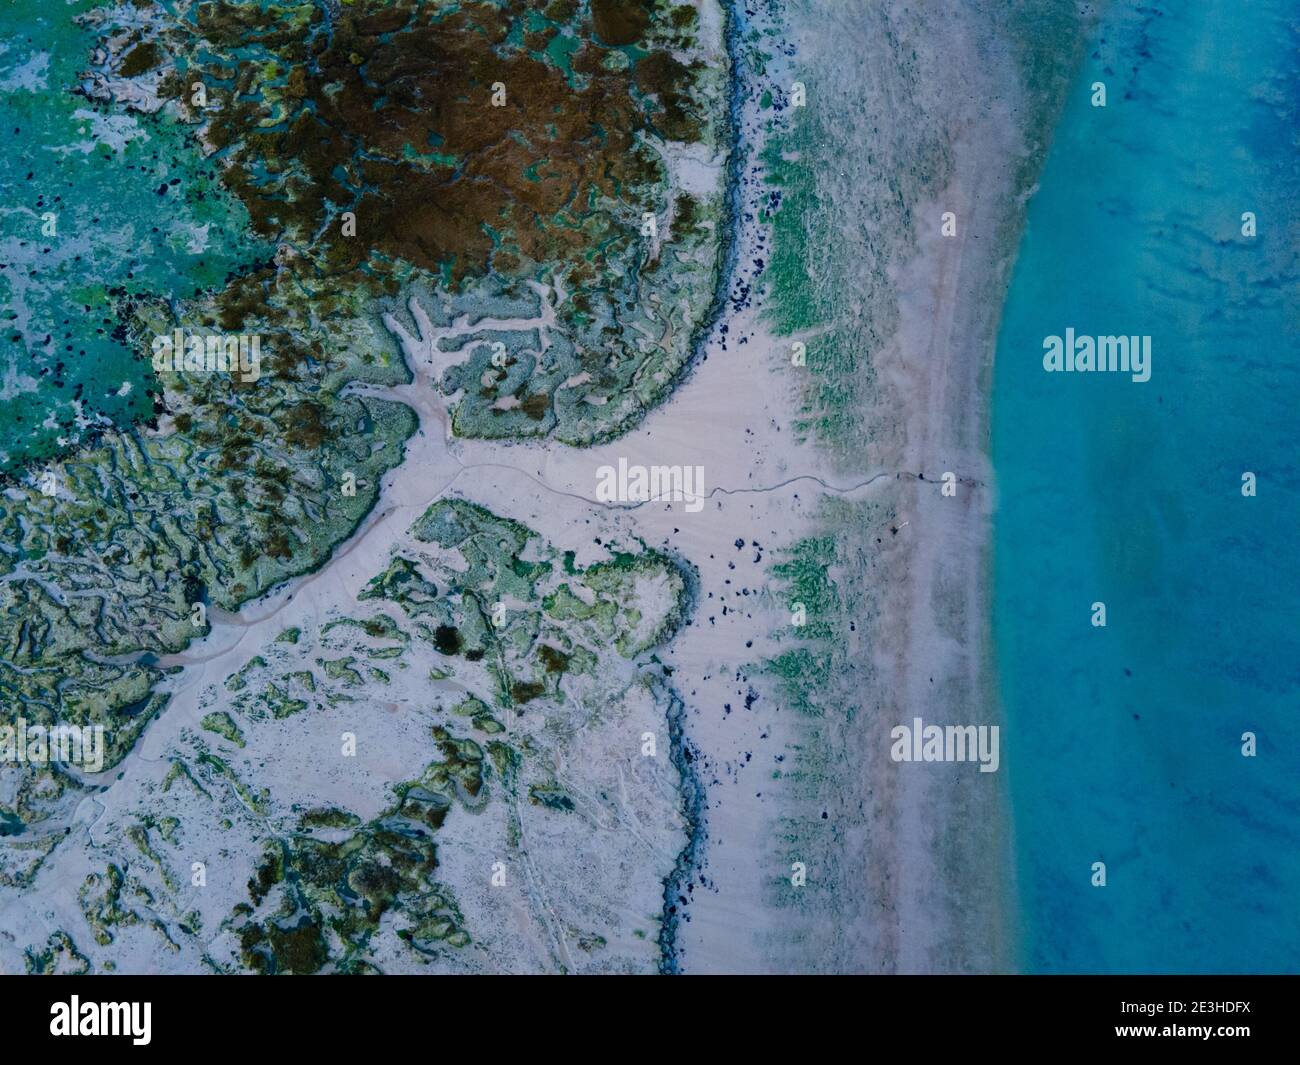 Image of the sea taken Top Down on Hayling island (birds eye view) Stock Photo